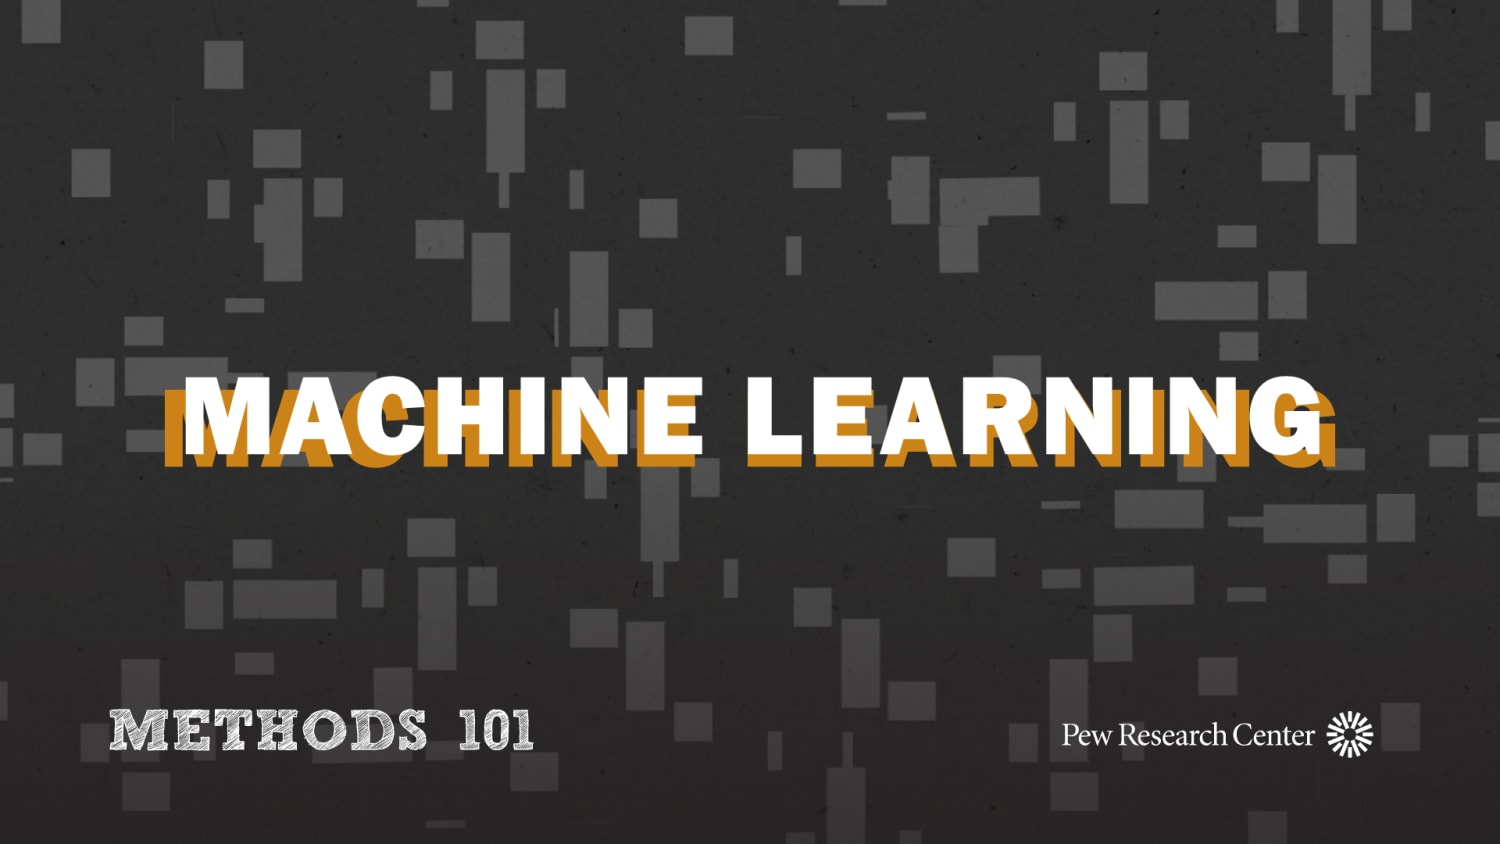 What is machine learning, and how does it work?